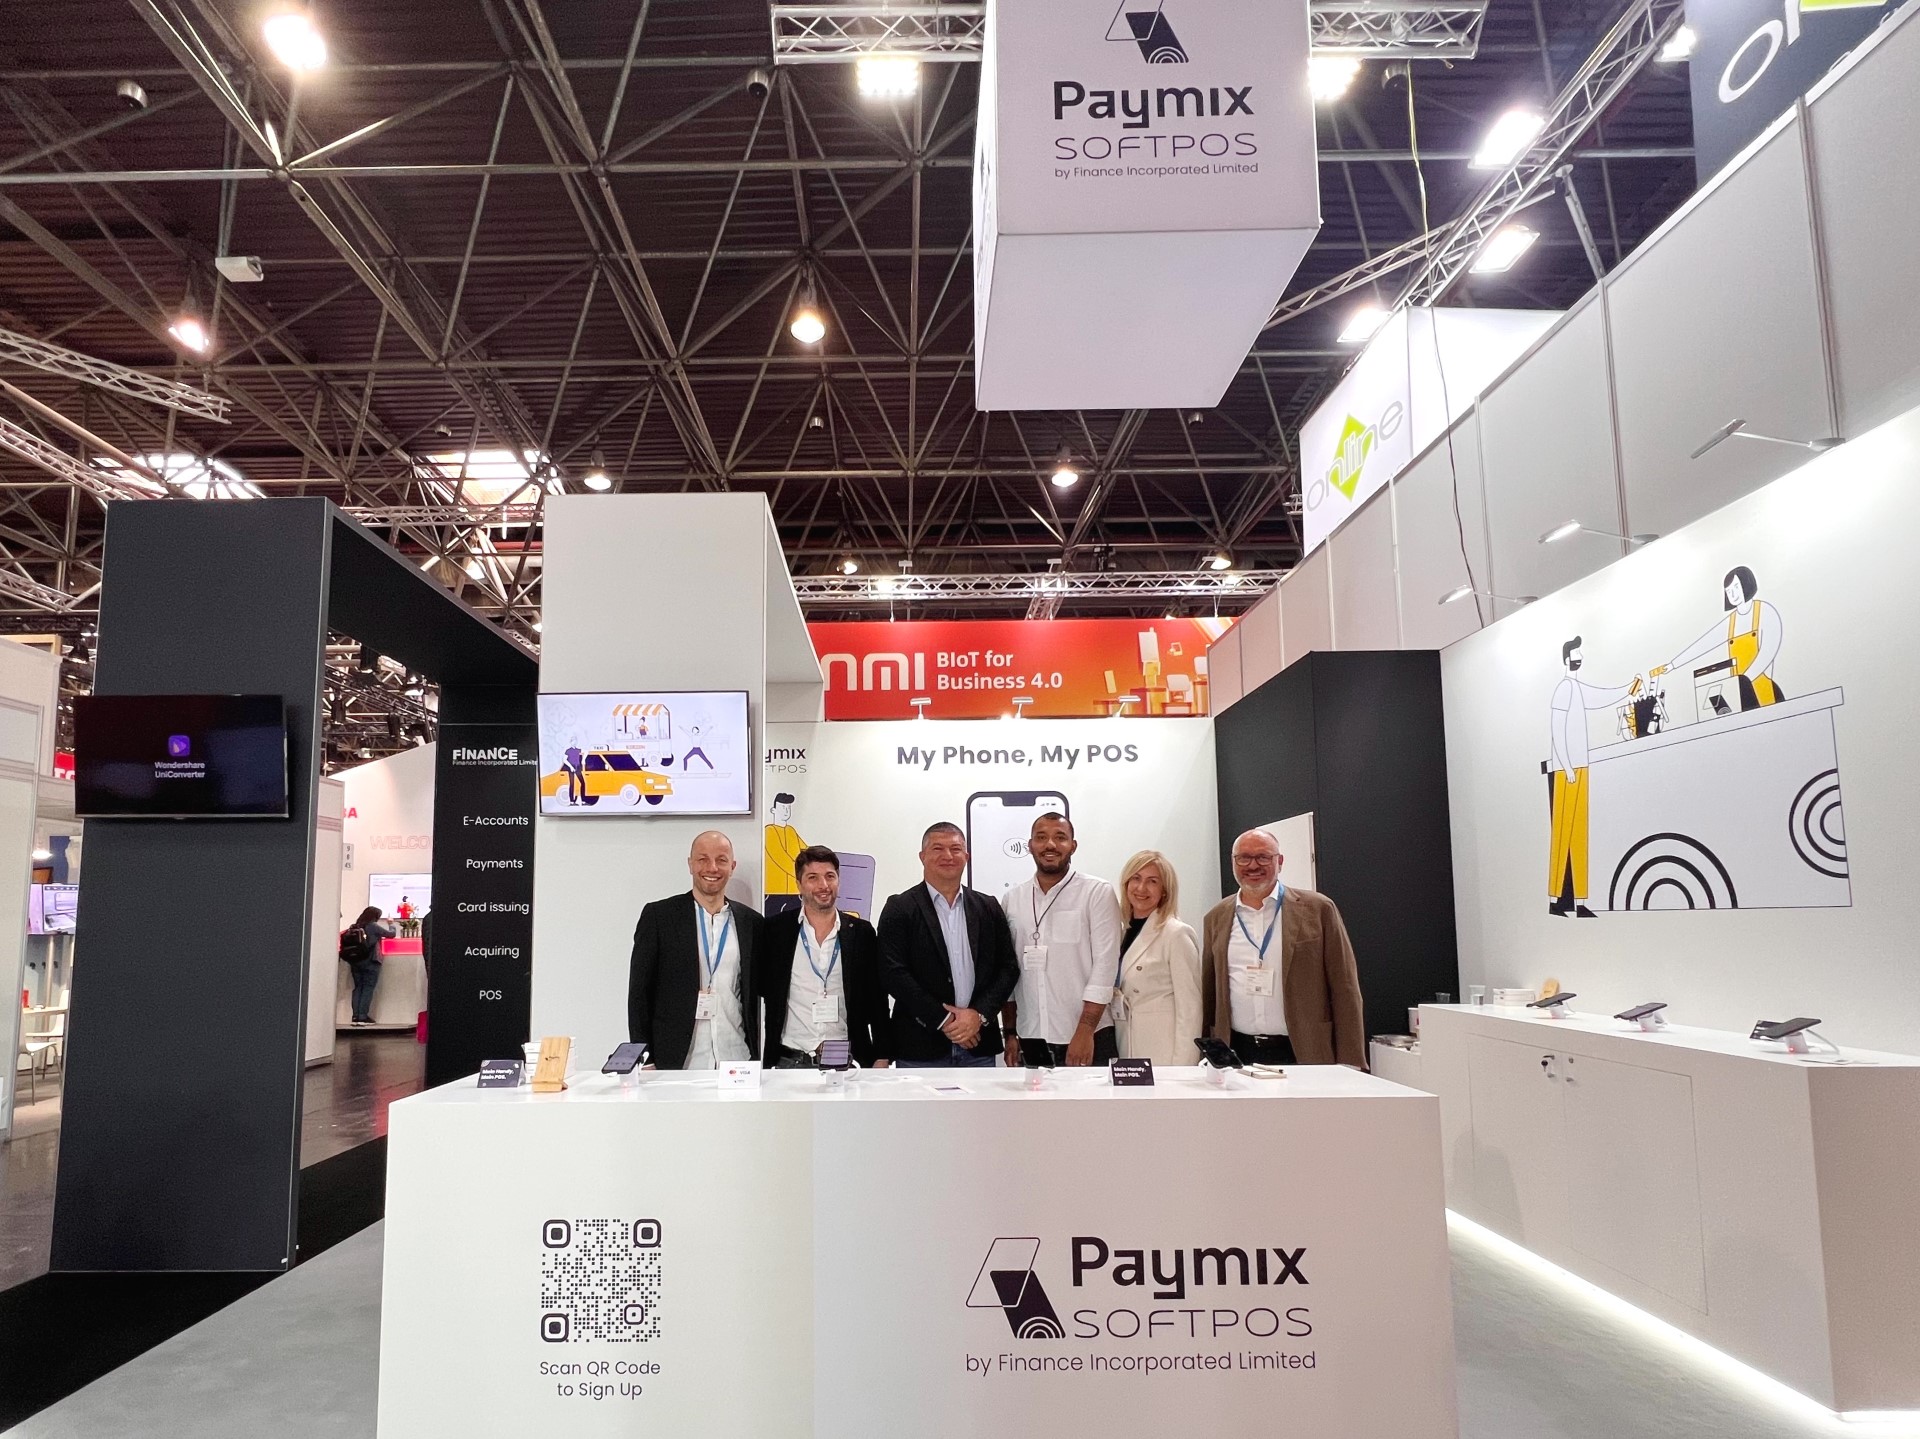 Paymix SoftPOS is making waves in Malta and in Germany